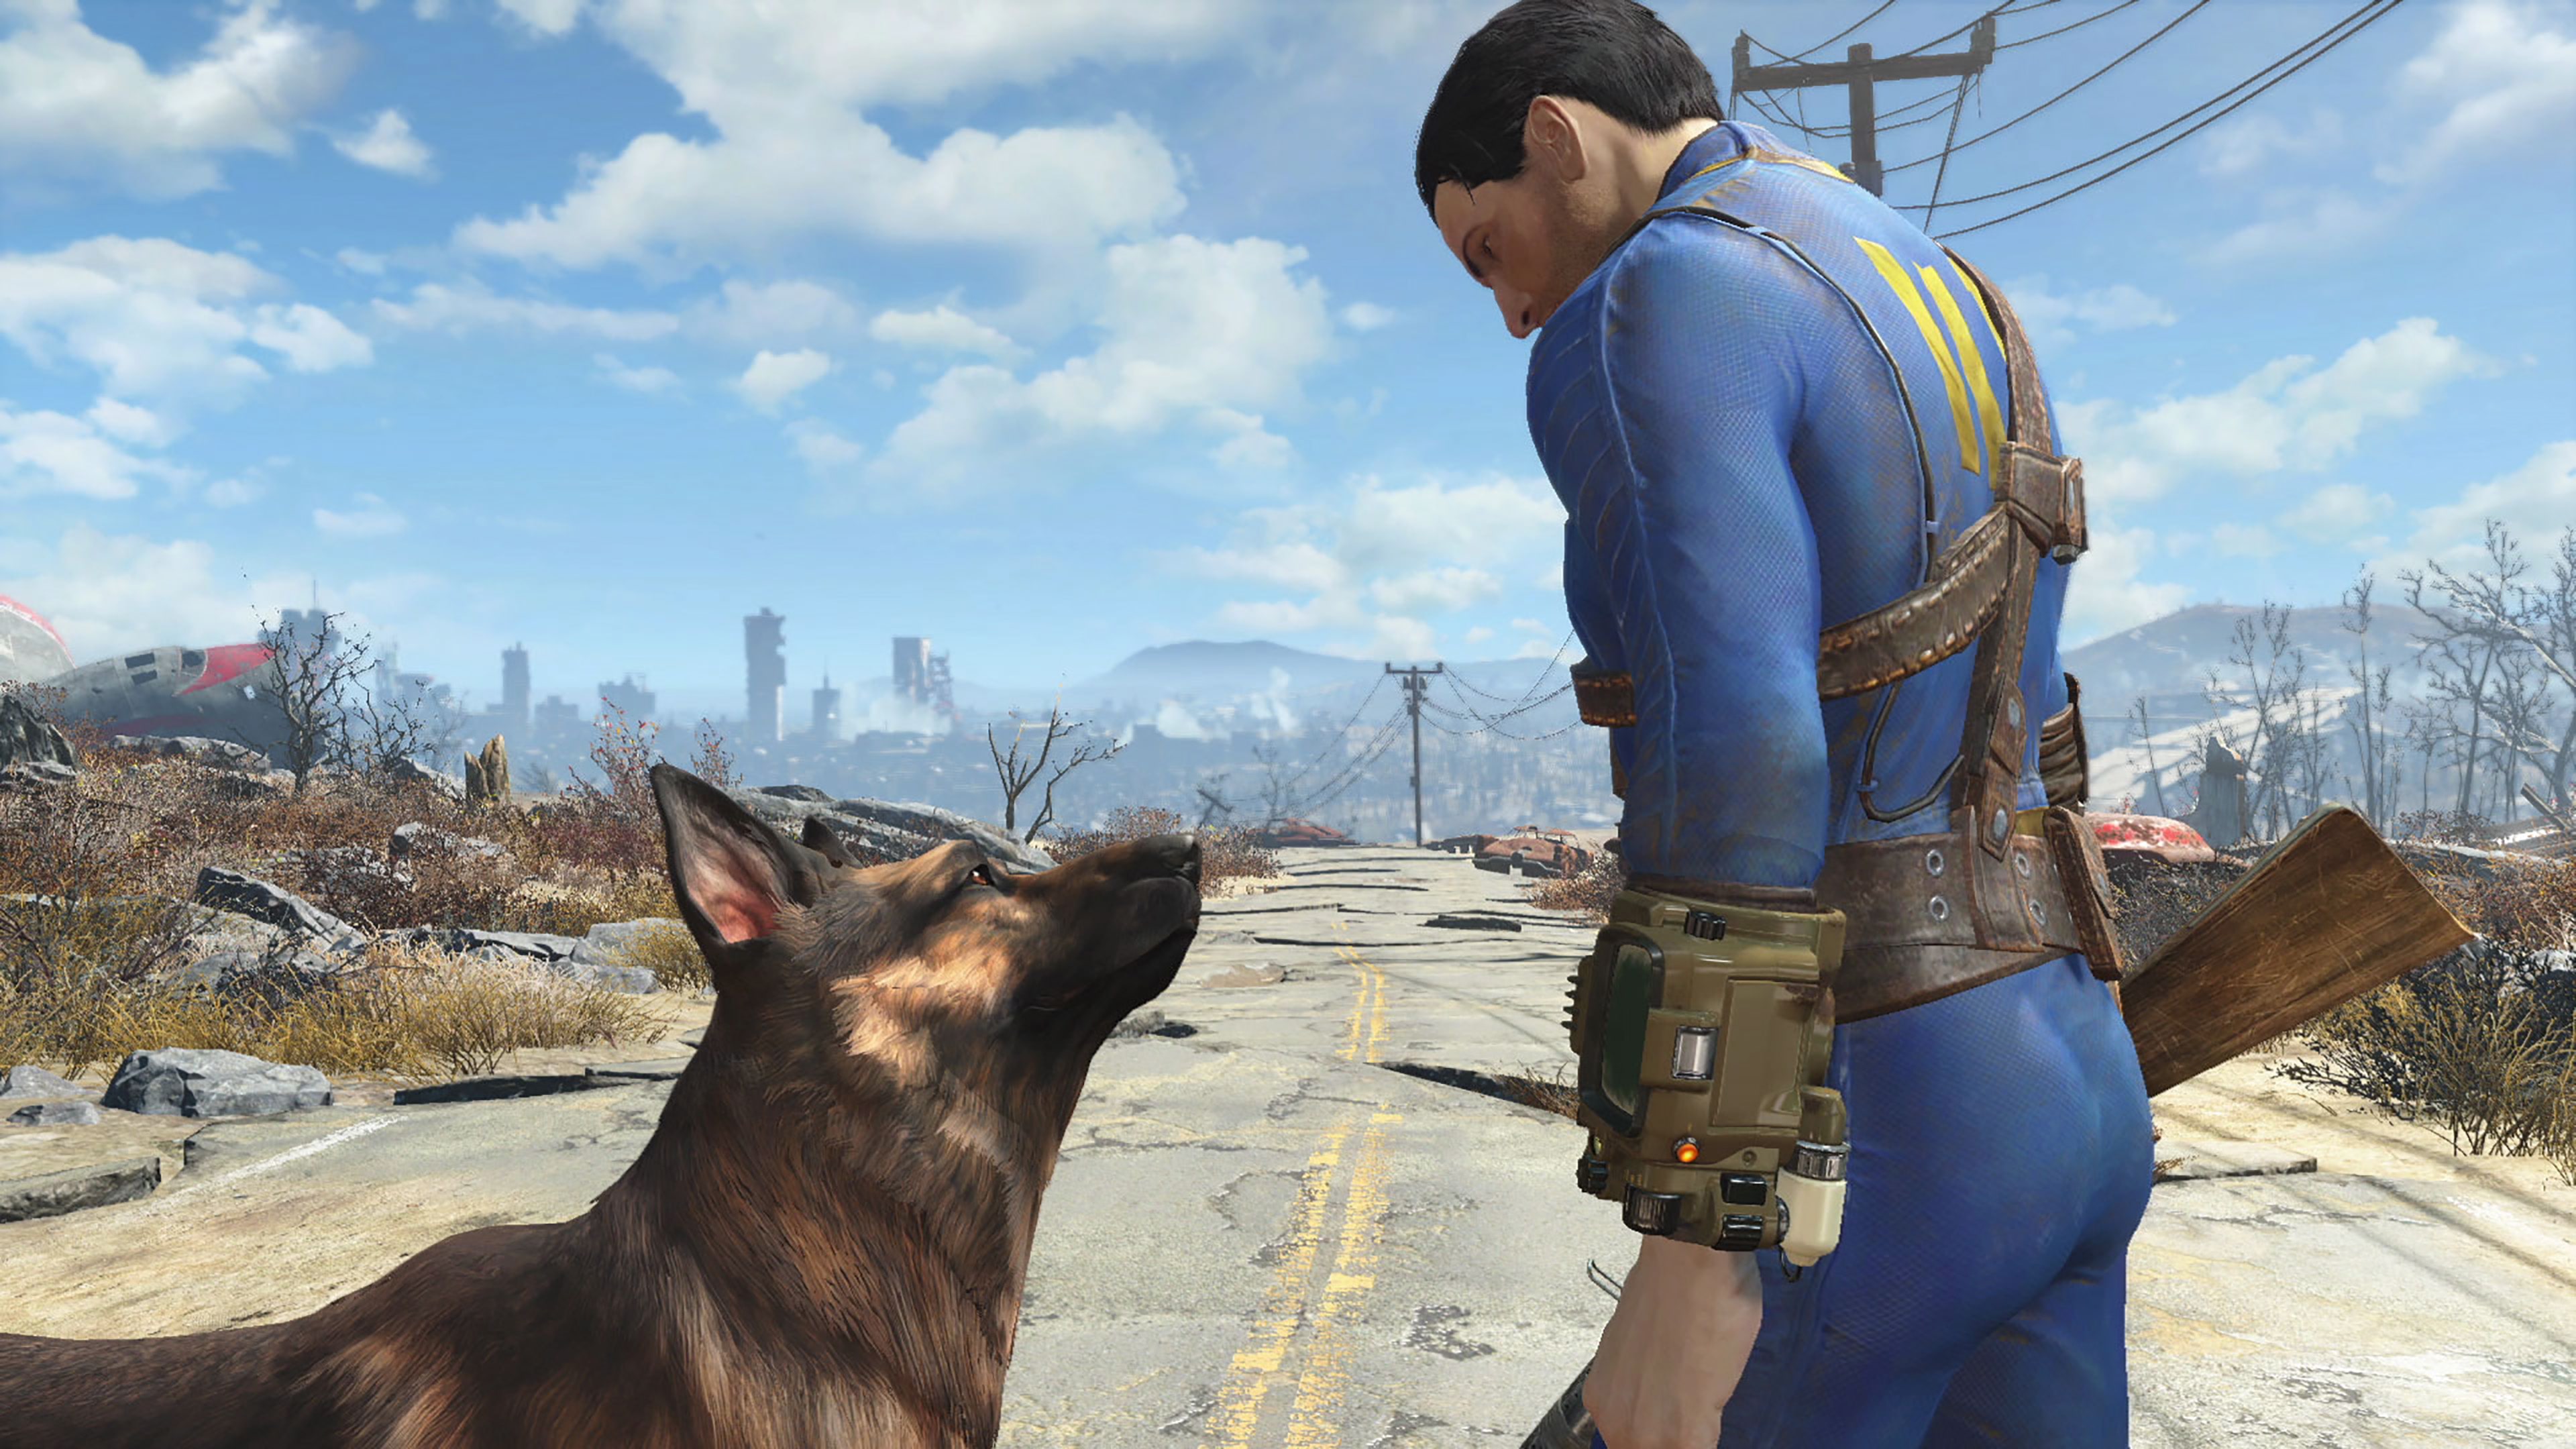 Fallout 4 дополнения 2022. Fallout 4. Fallout 4 VR. Fallout 4 GOTY. Фоллаут 4 ВР.